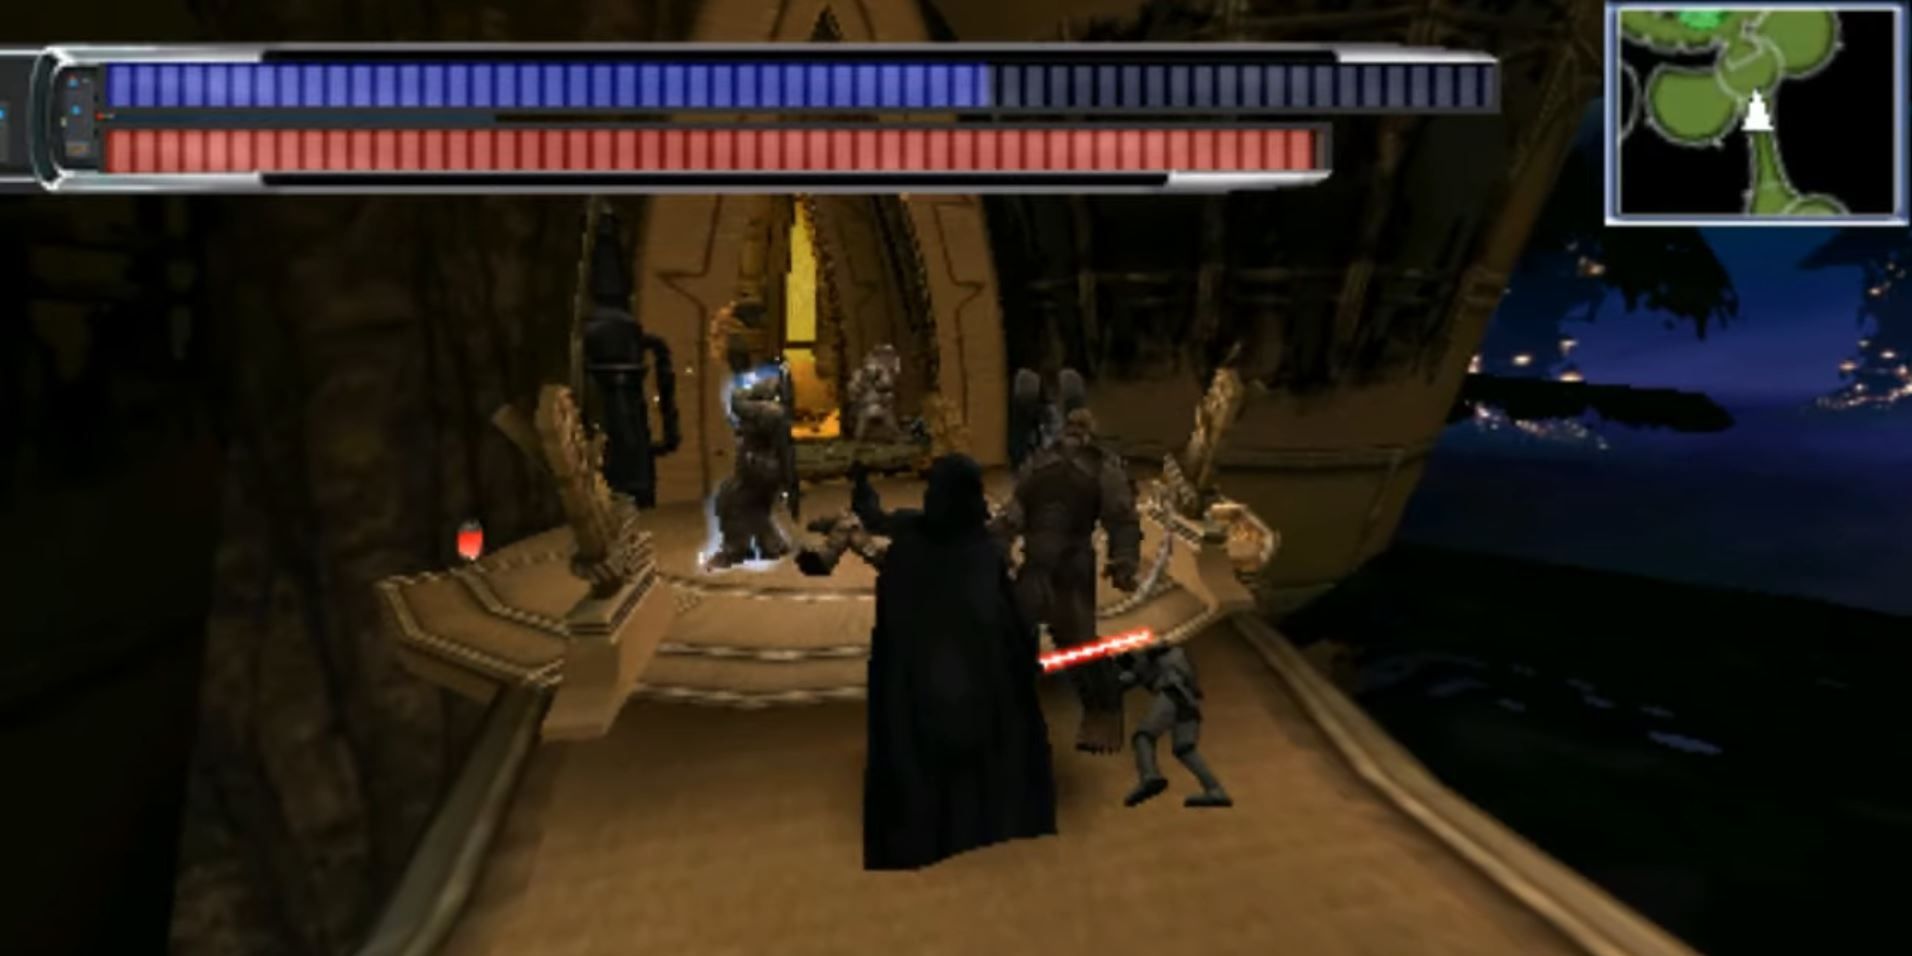 Darth Vader Attacking In The Force Unleashed For PSP